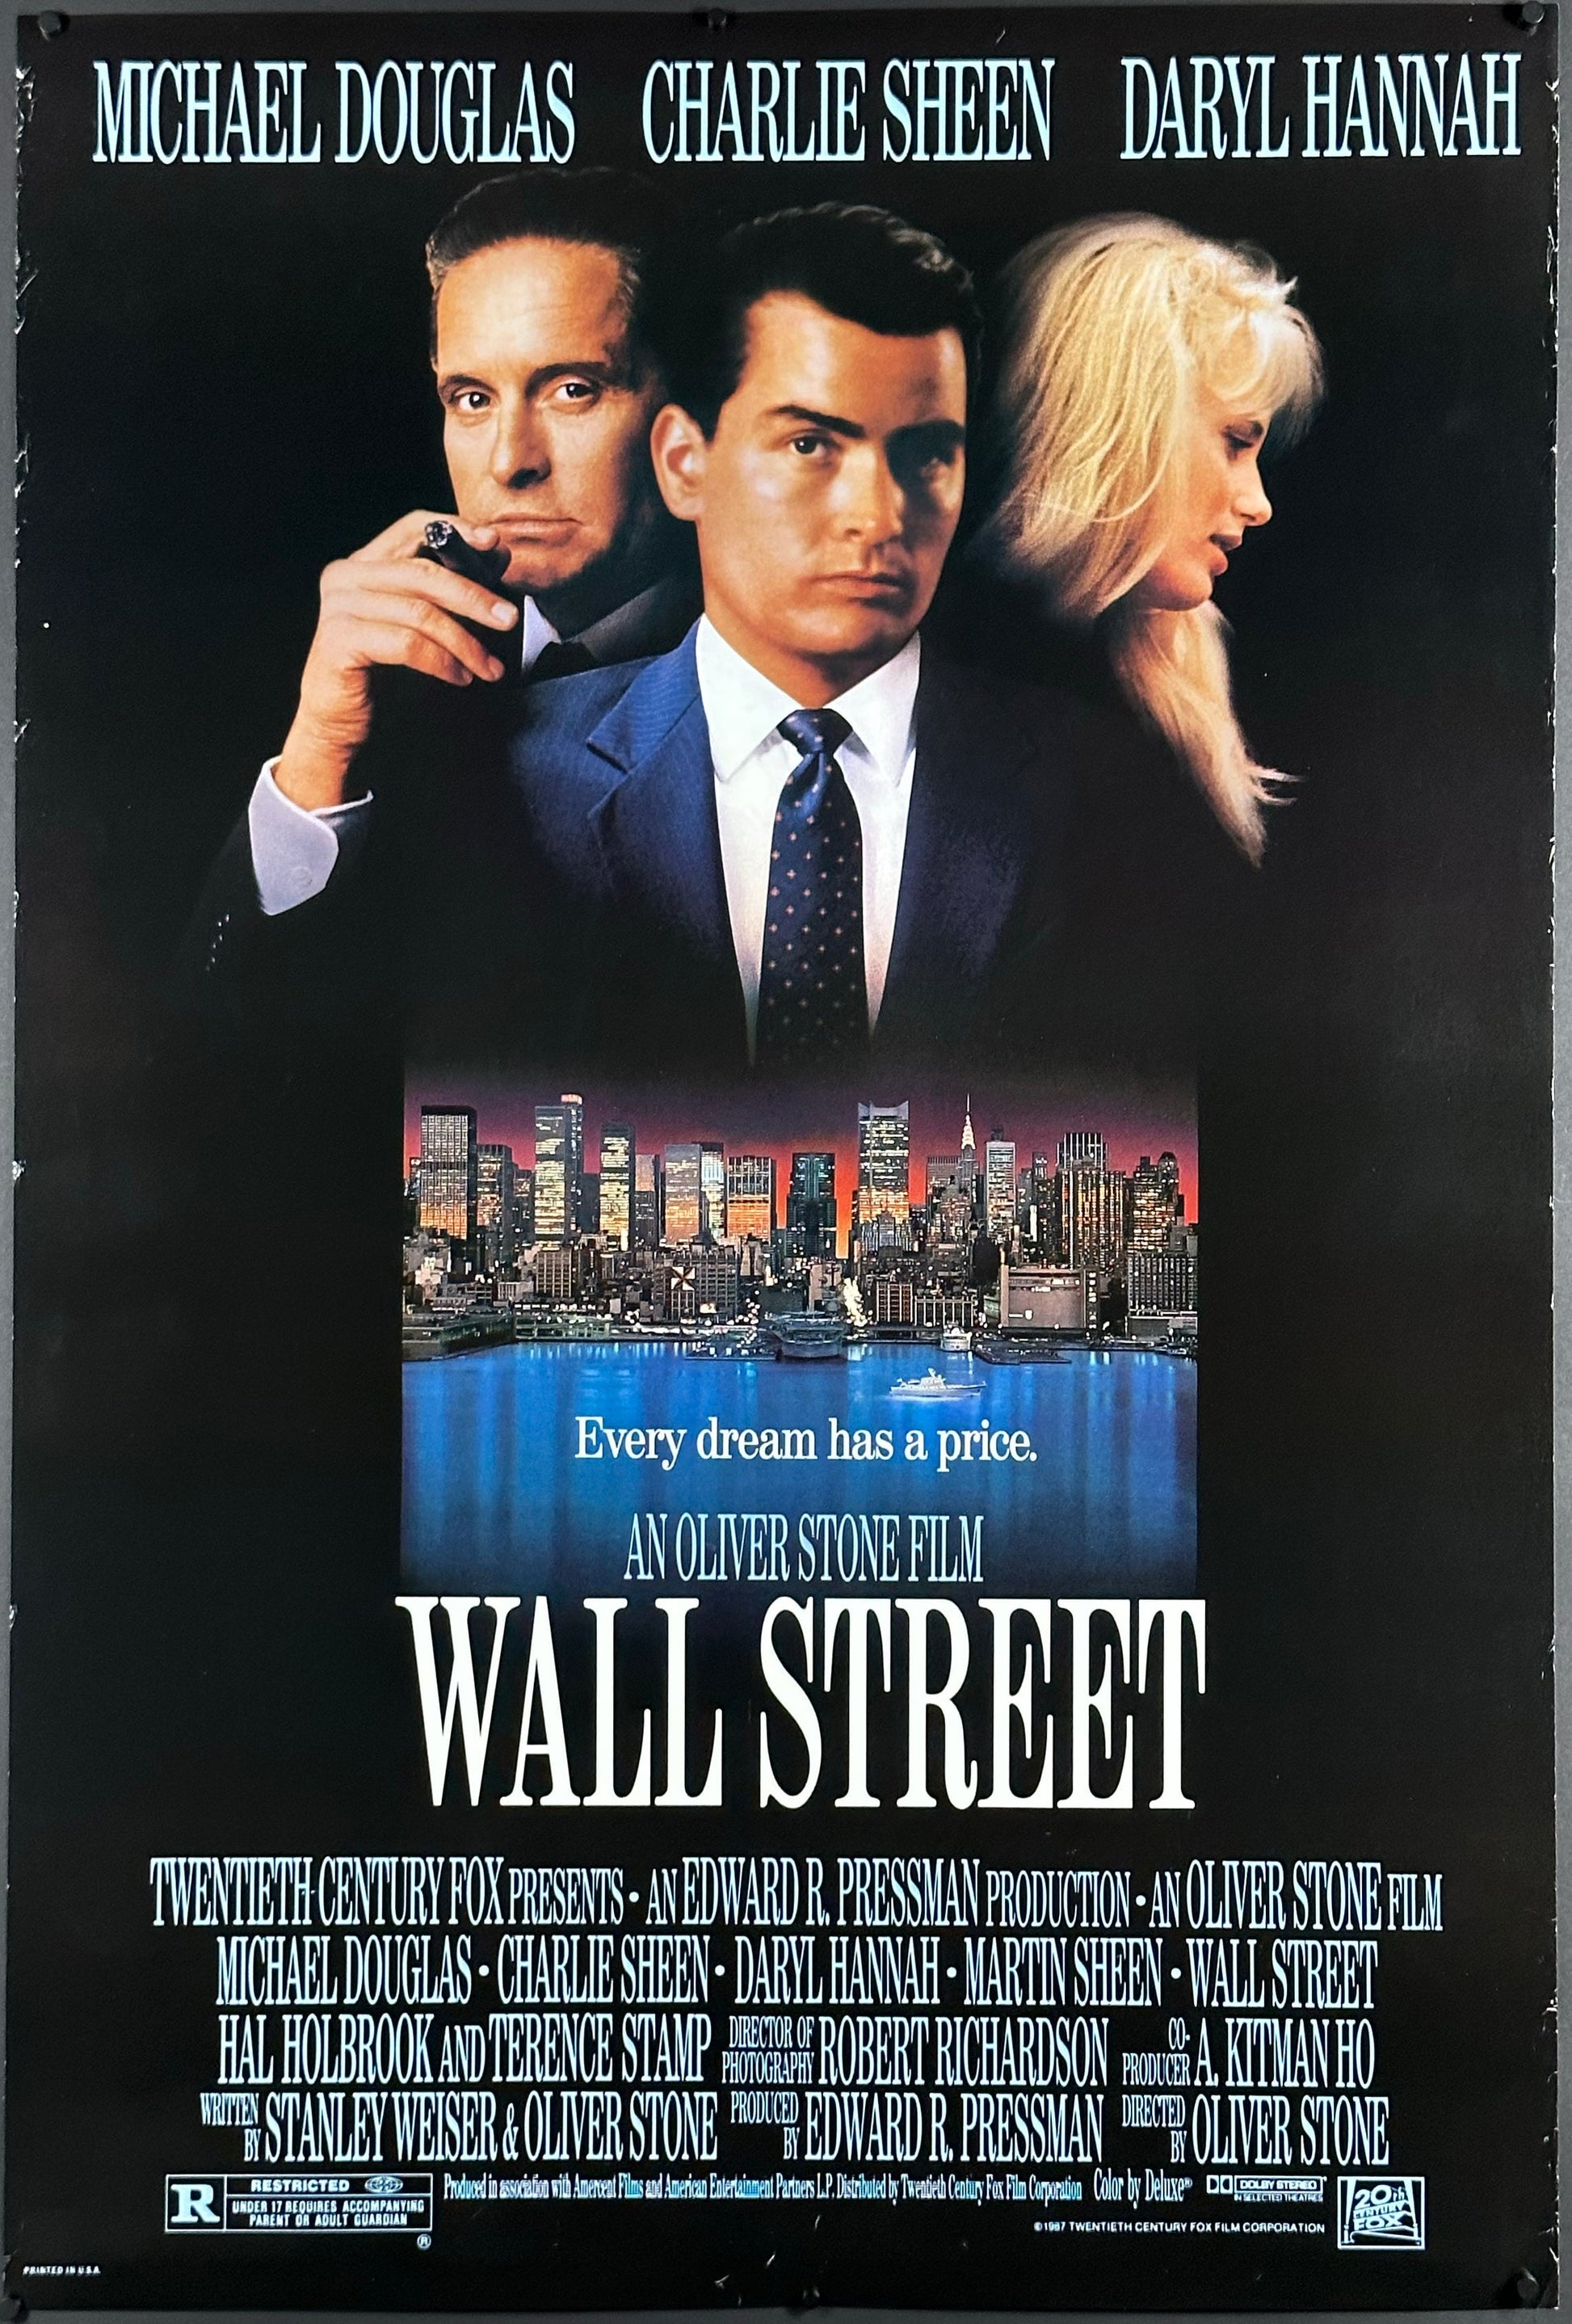 Wall Street US One Sheet (1987) - ORIGINAL RELEASE - posterpalace.com